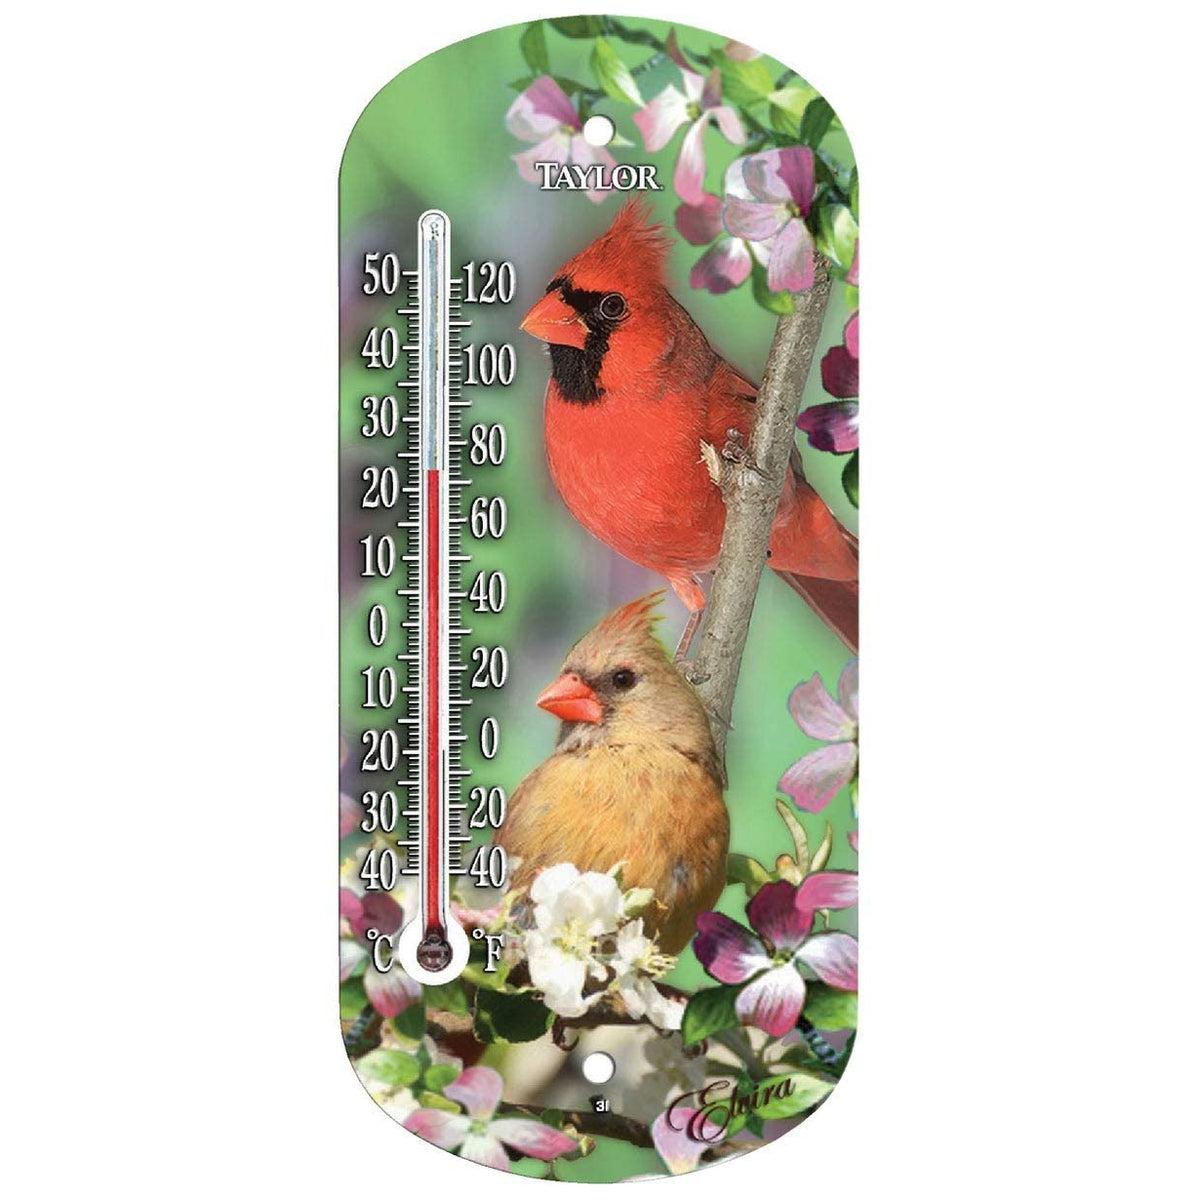 Taylor 5204 Cardinal Decorative Window View Tube Thermometer, -40 to 120 deg F